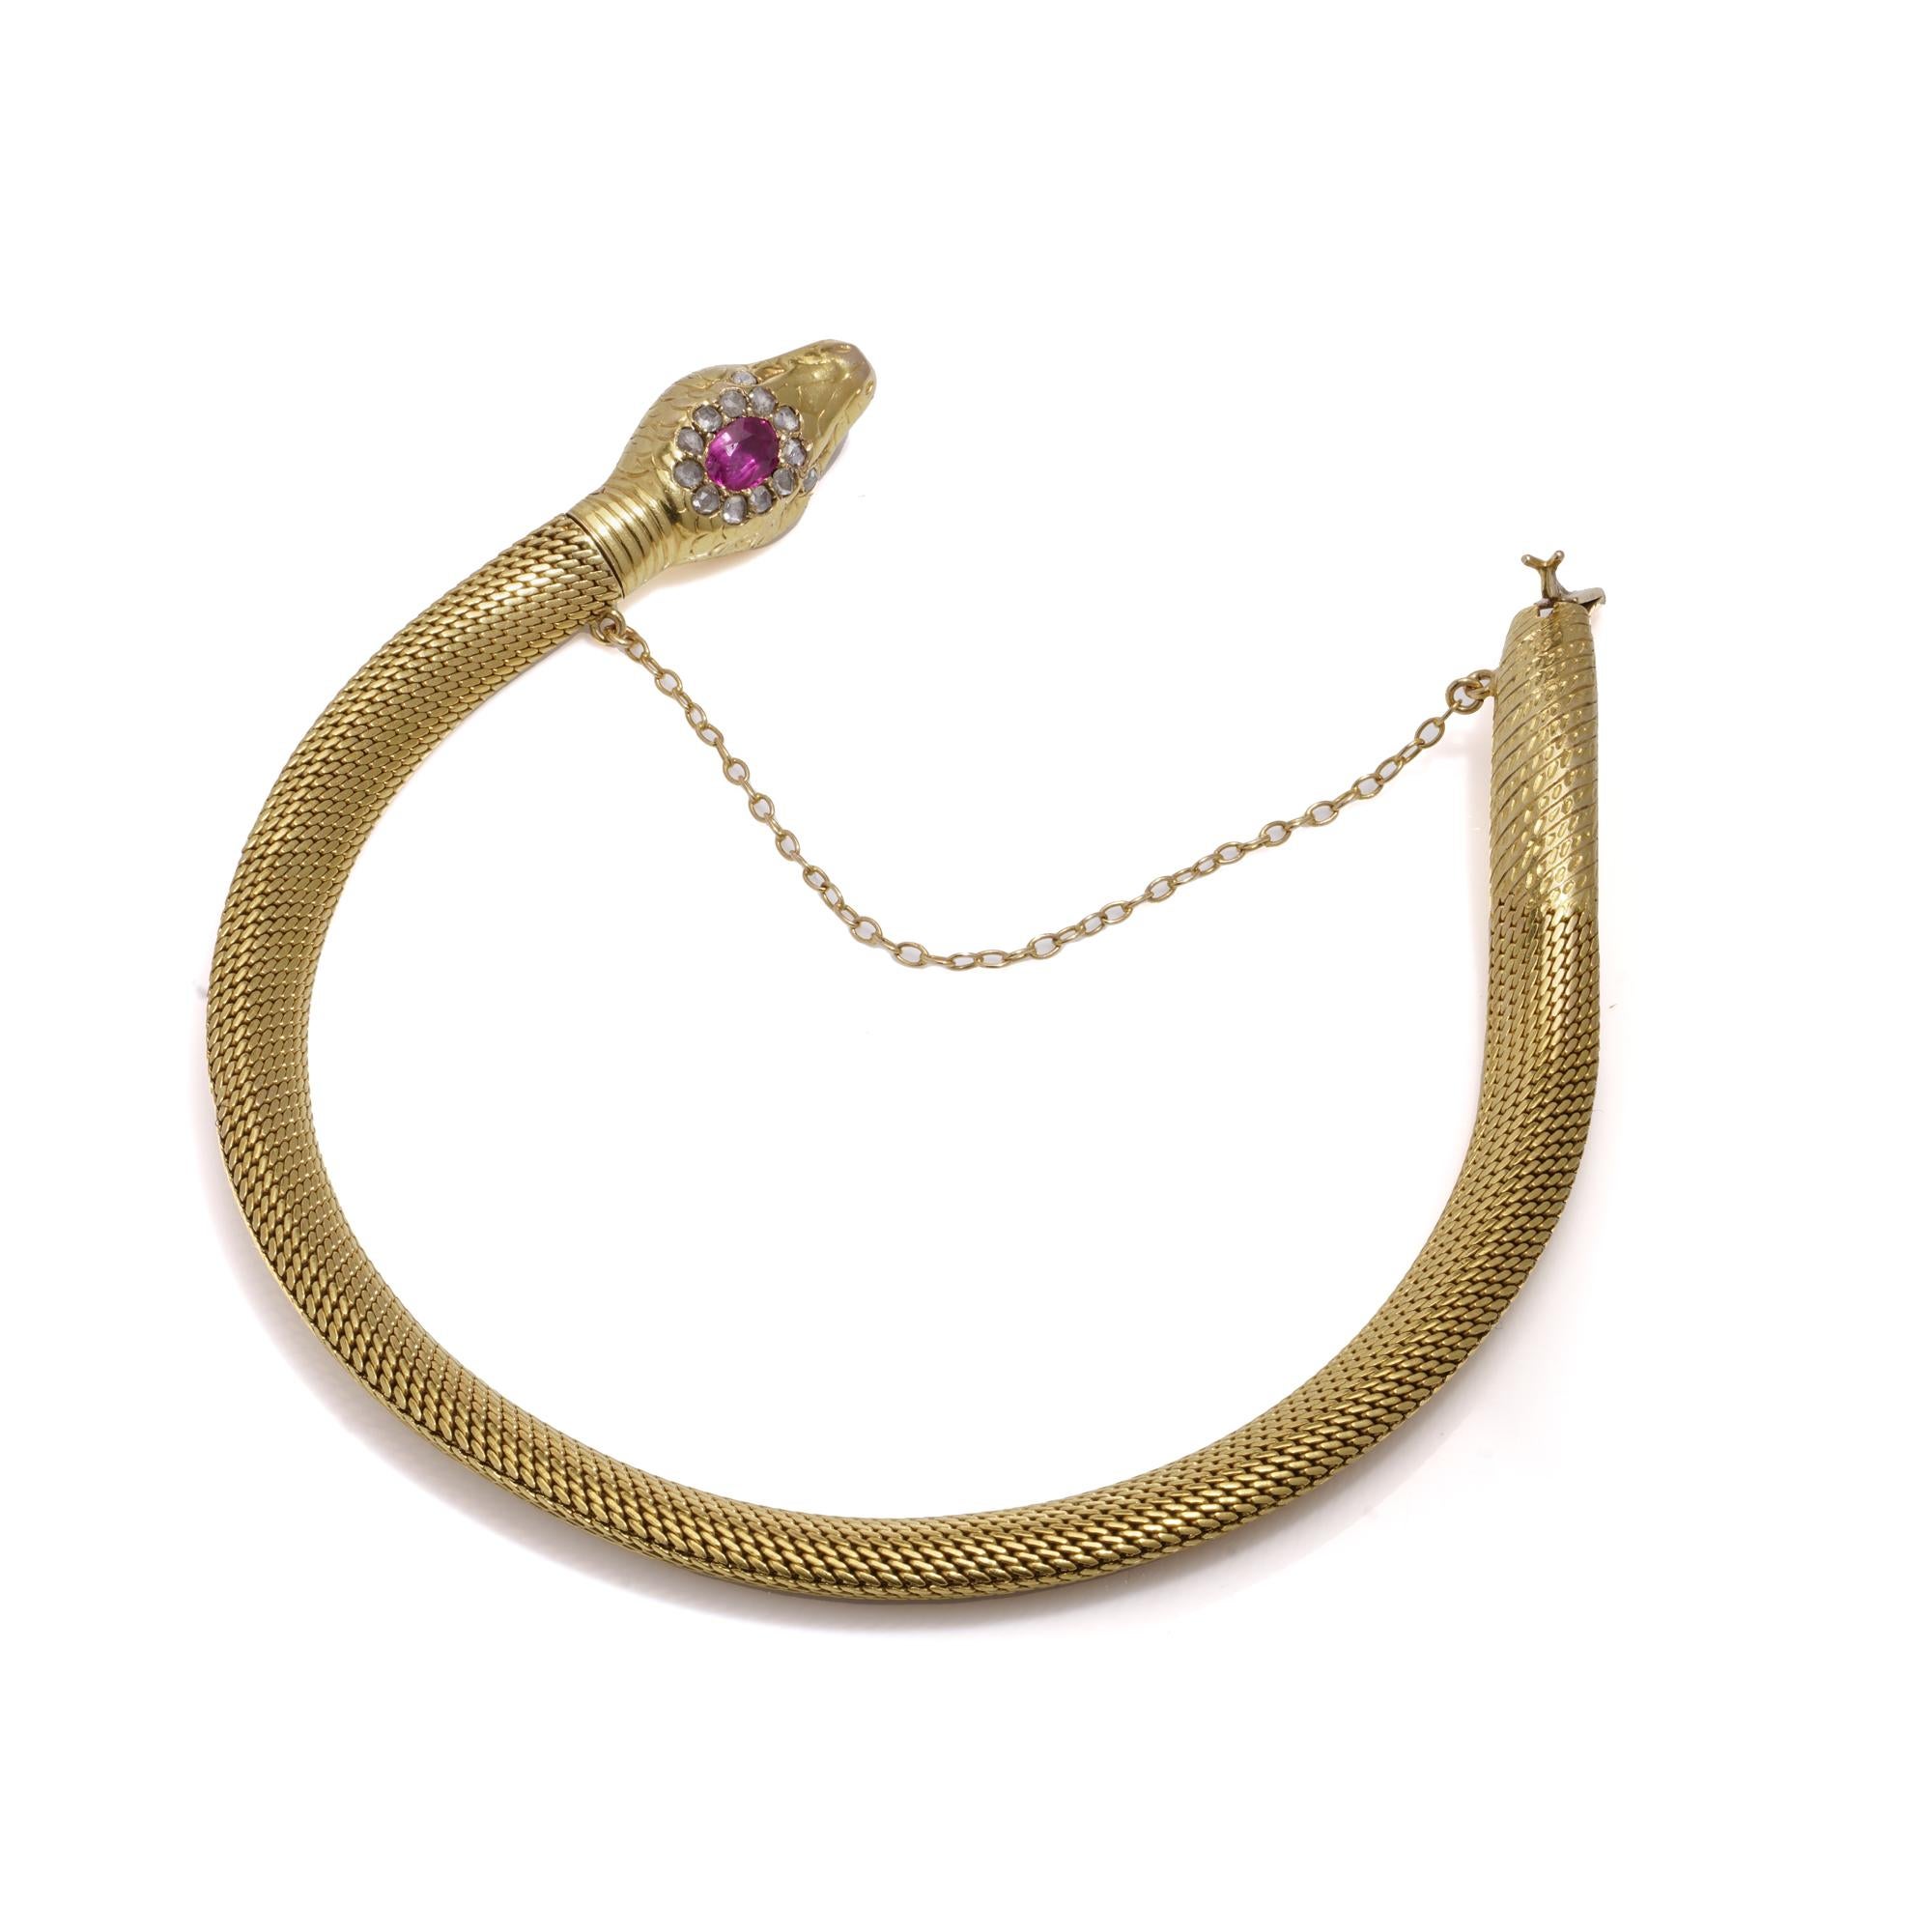 This is an antique Swedish 18kt yellow gold Ouroboros serpent hollow mesh bracelet. The snake's eyes are set with diamonds, and its head is accented with an oval ruby surrounded by rose-cut diamonds, creating a stunning cluster. The piece is